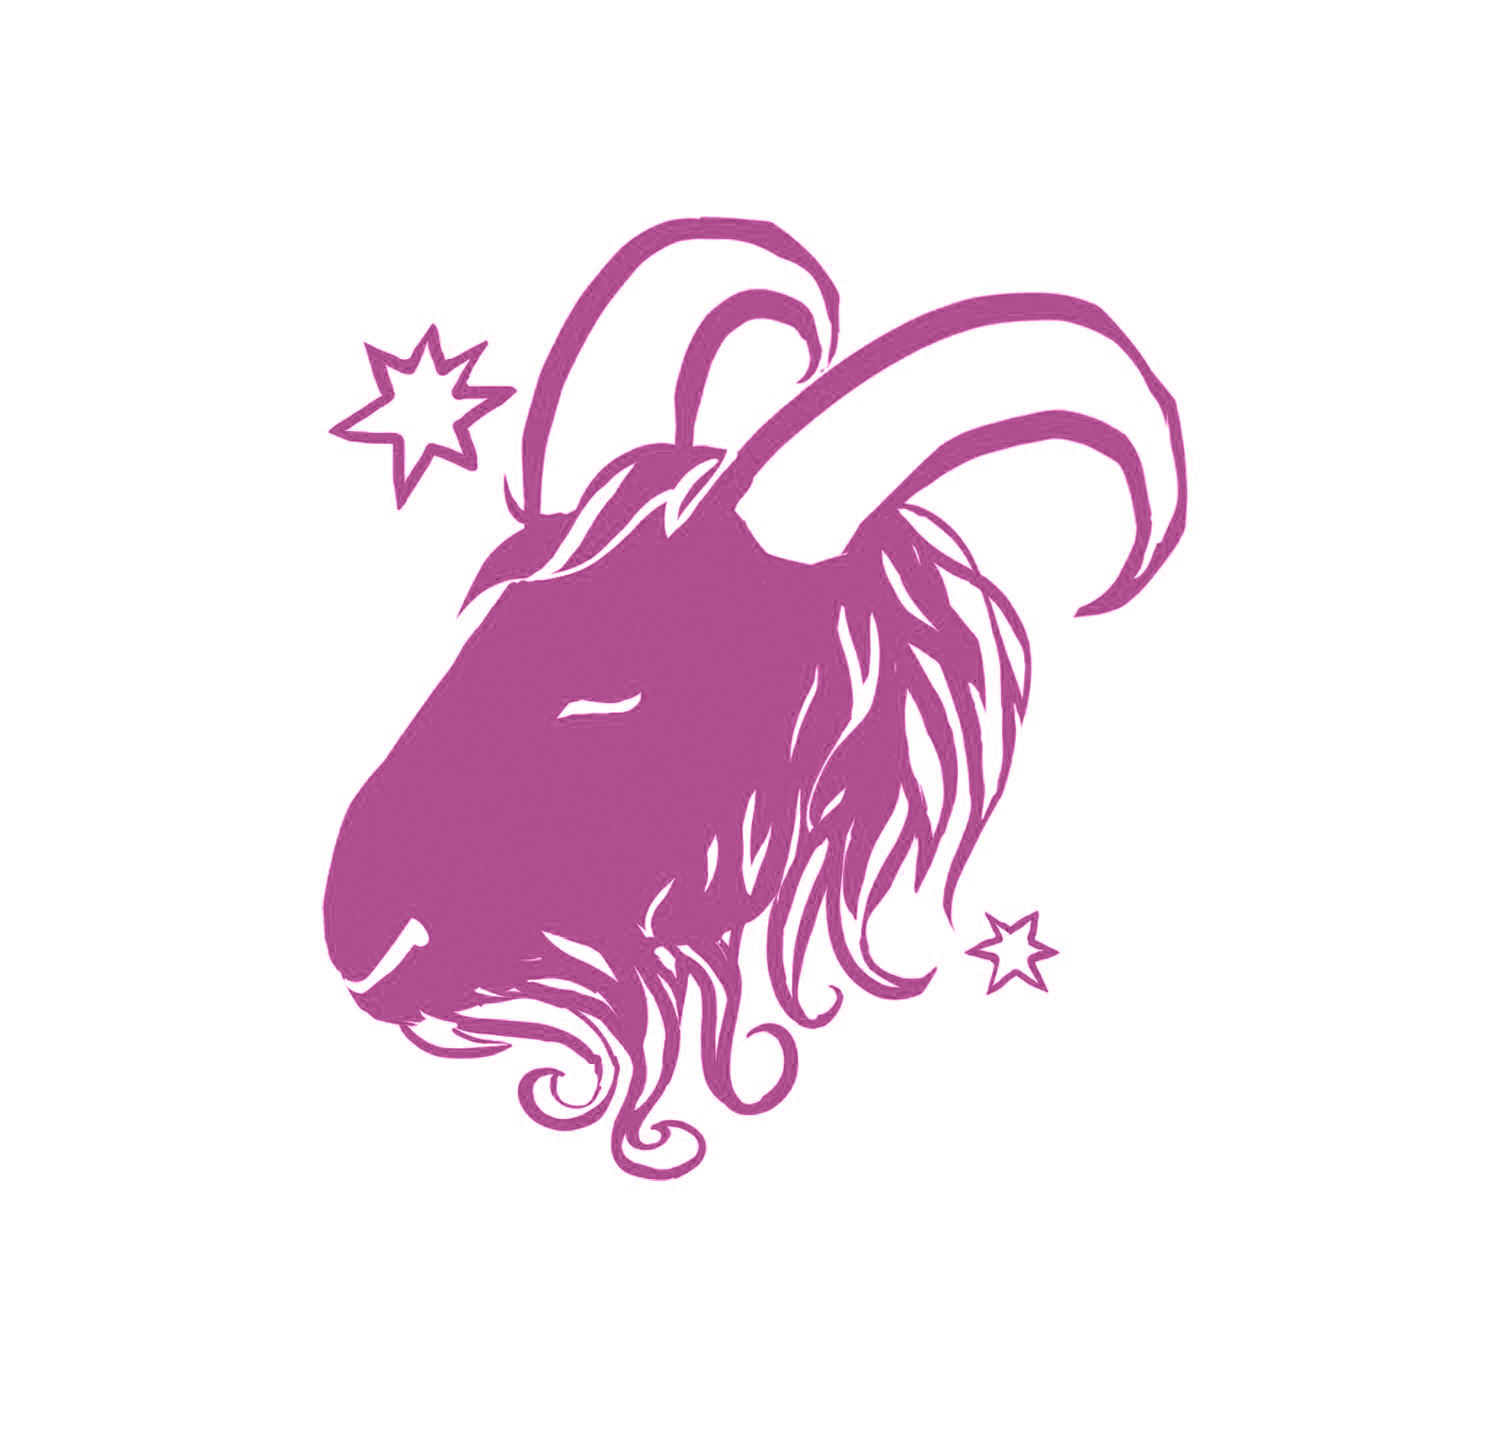 A goat head's profile. This illustration is in pink/purple, and is decorated with stars